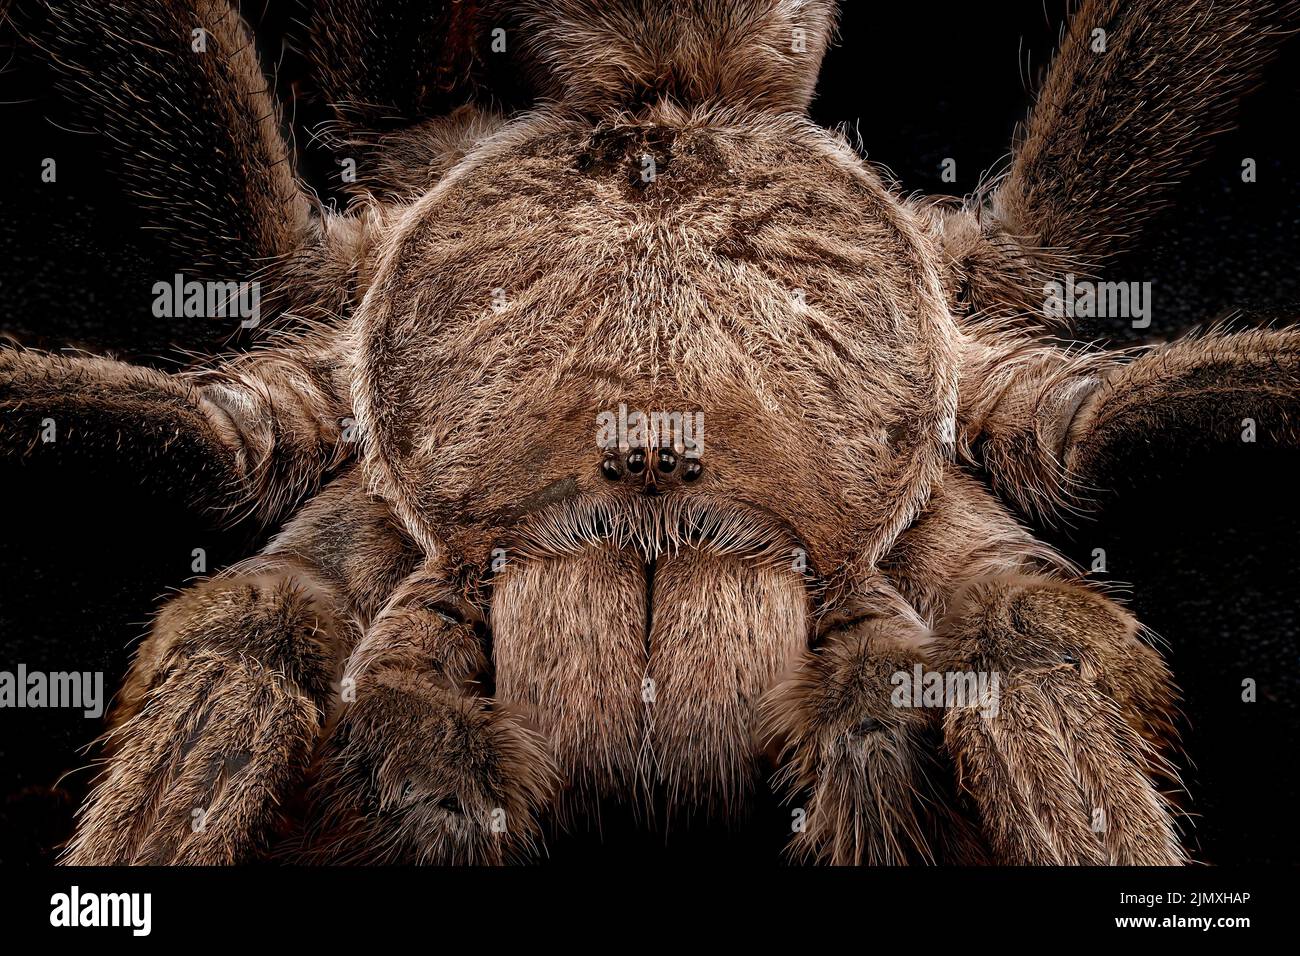 Macro close up of an Australian Tarantula, also known as a Whistling Spider because of the hissing sound they make. They are huge and very hairy. Stock Photo